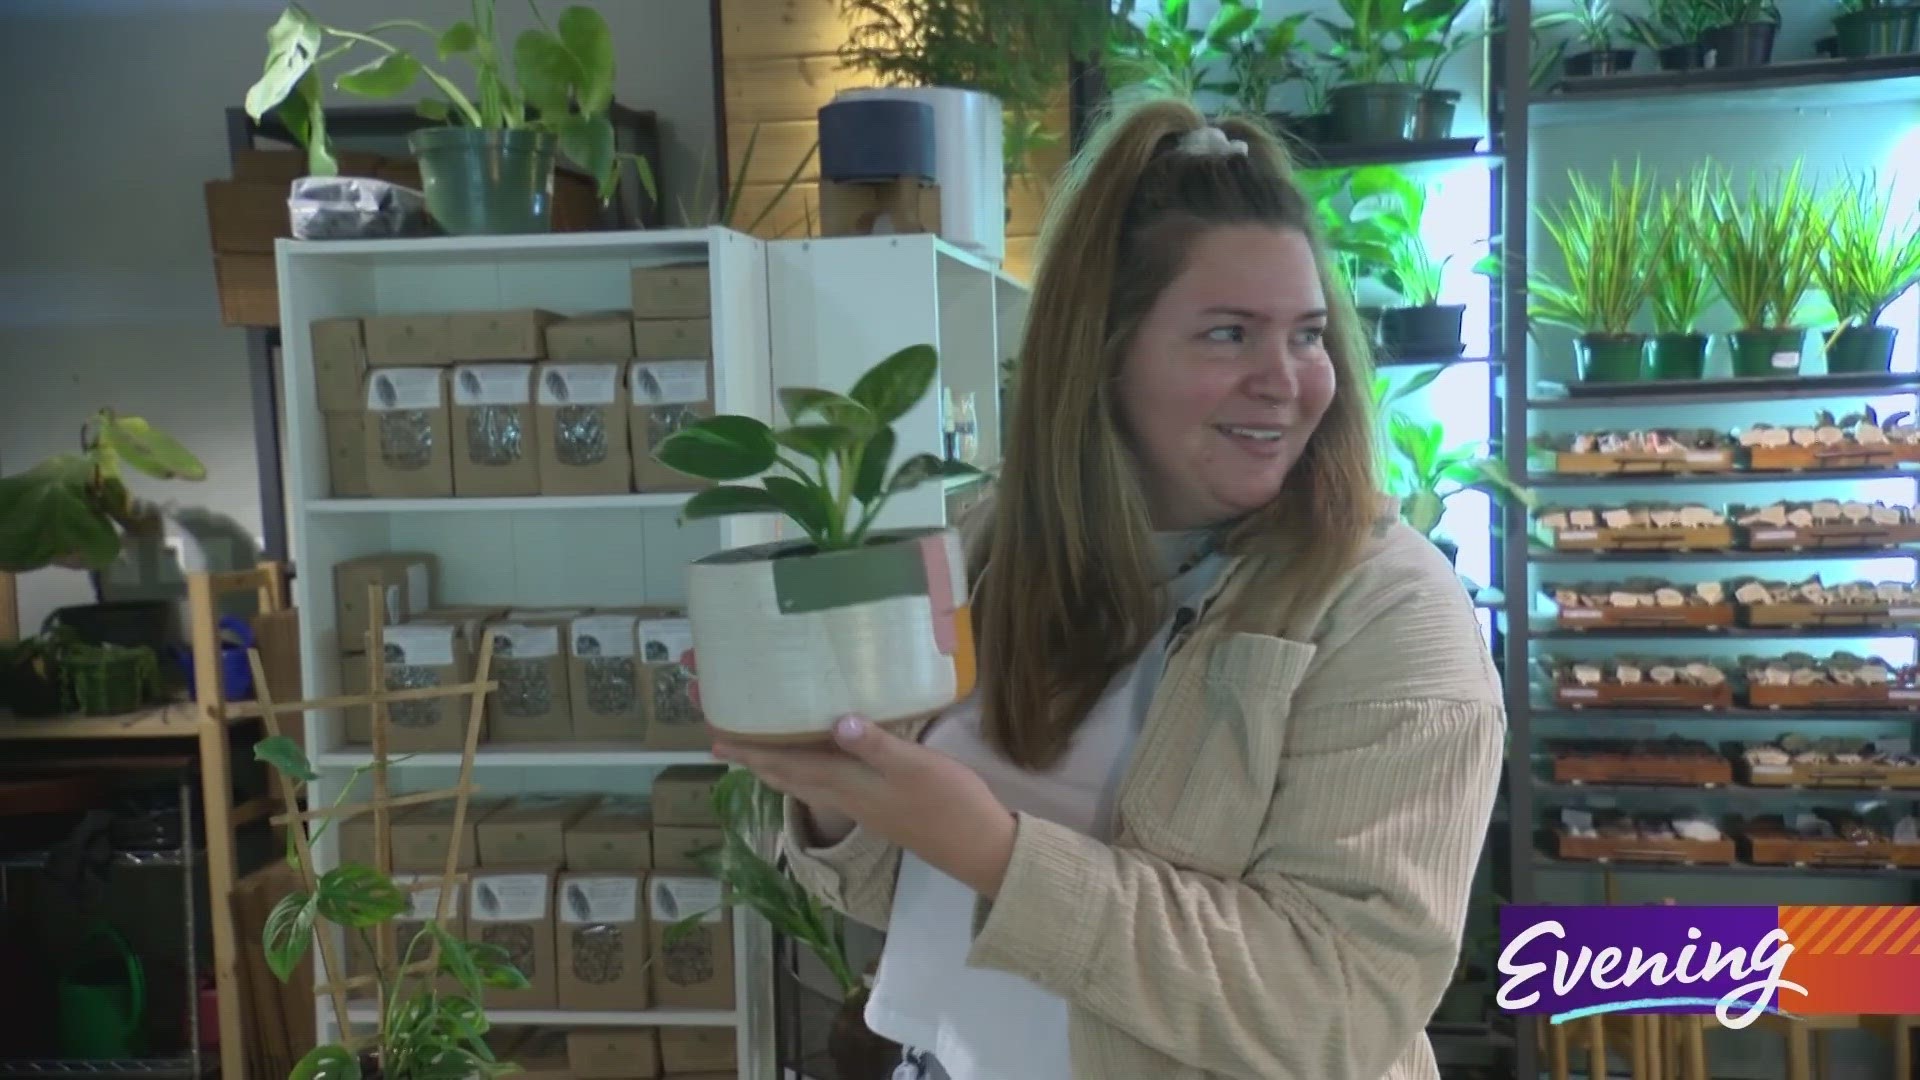 If you dream of having a green thumb, this plant shop can help.